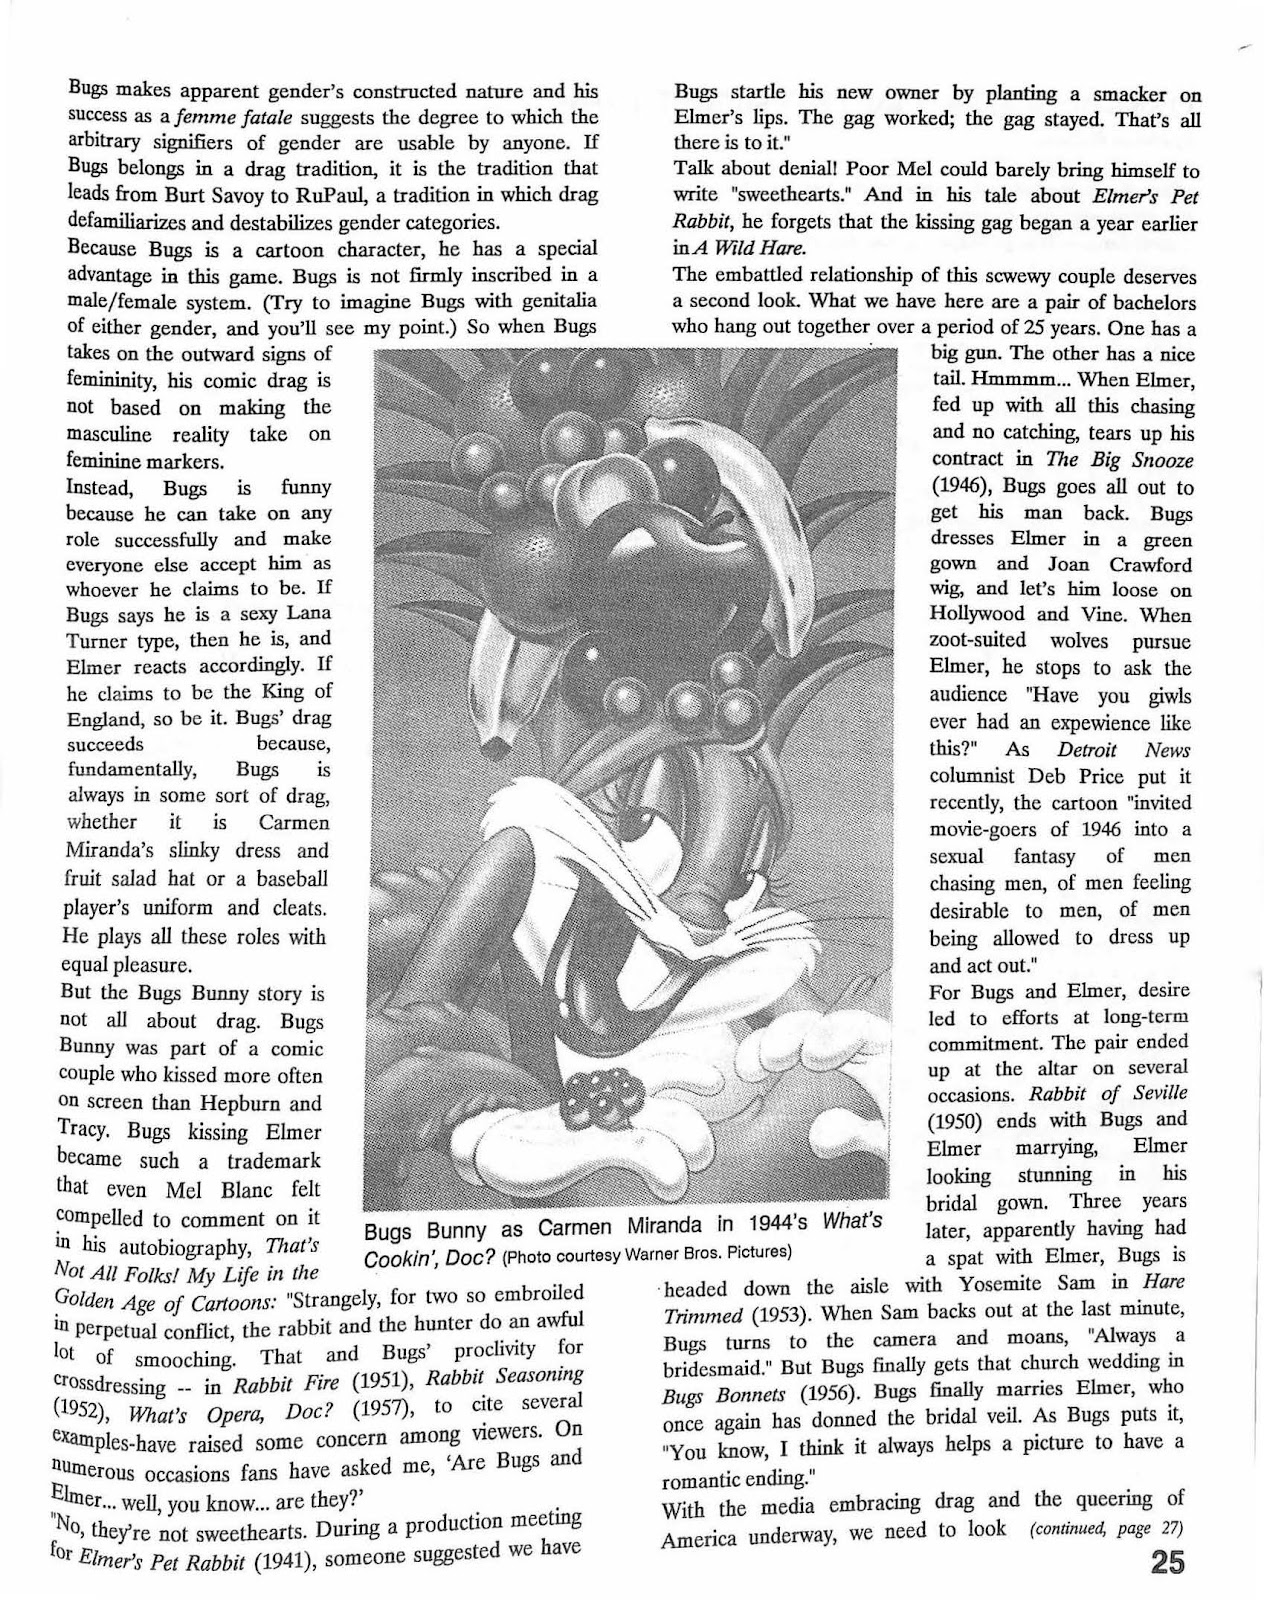 Page 27 from Cross-Talk: The Gender Community's News & Information Monthly, No. 60 (October, 1994), “Bugs Bunny: Queer as a Three Dollar Bill” by Hank Sartin